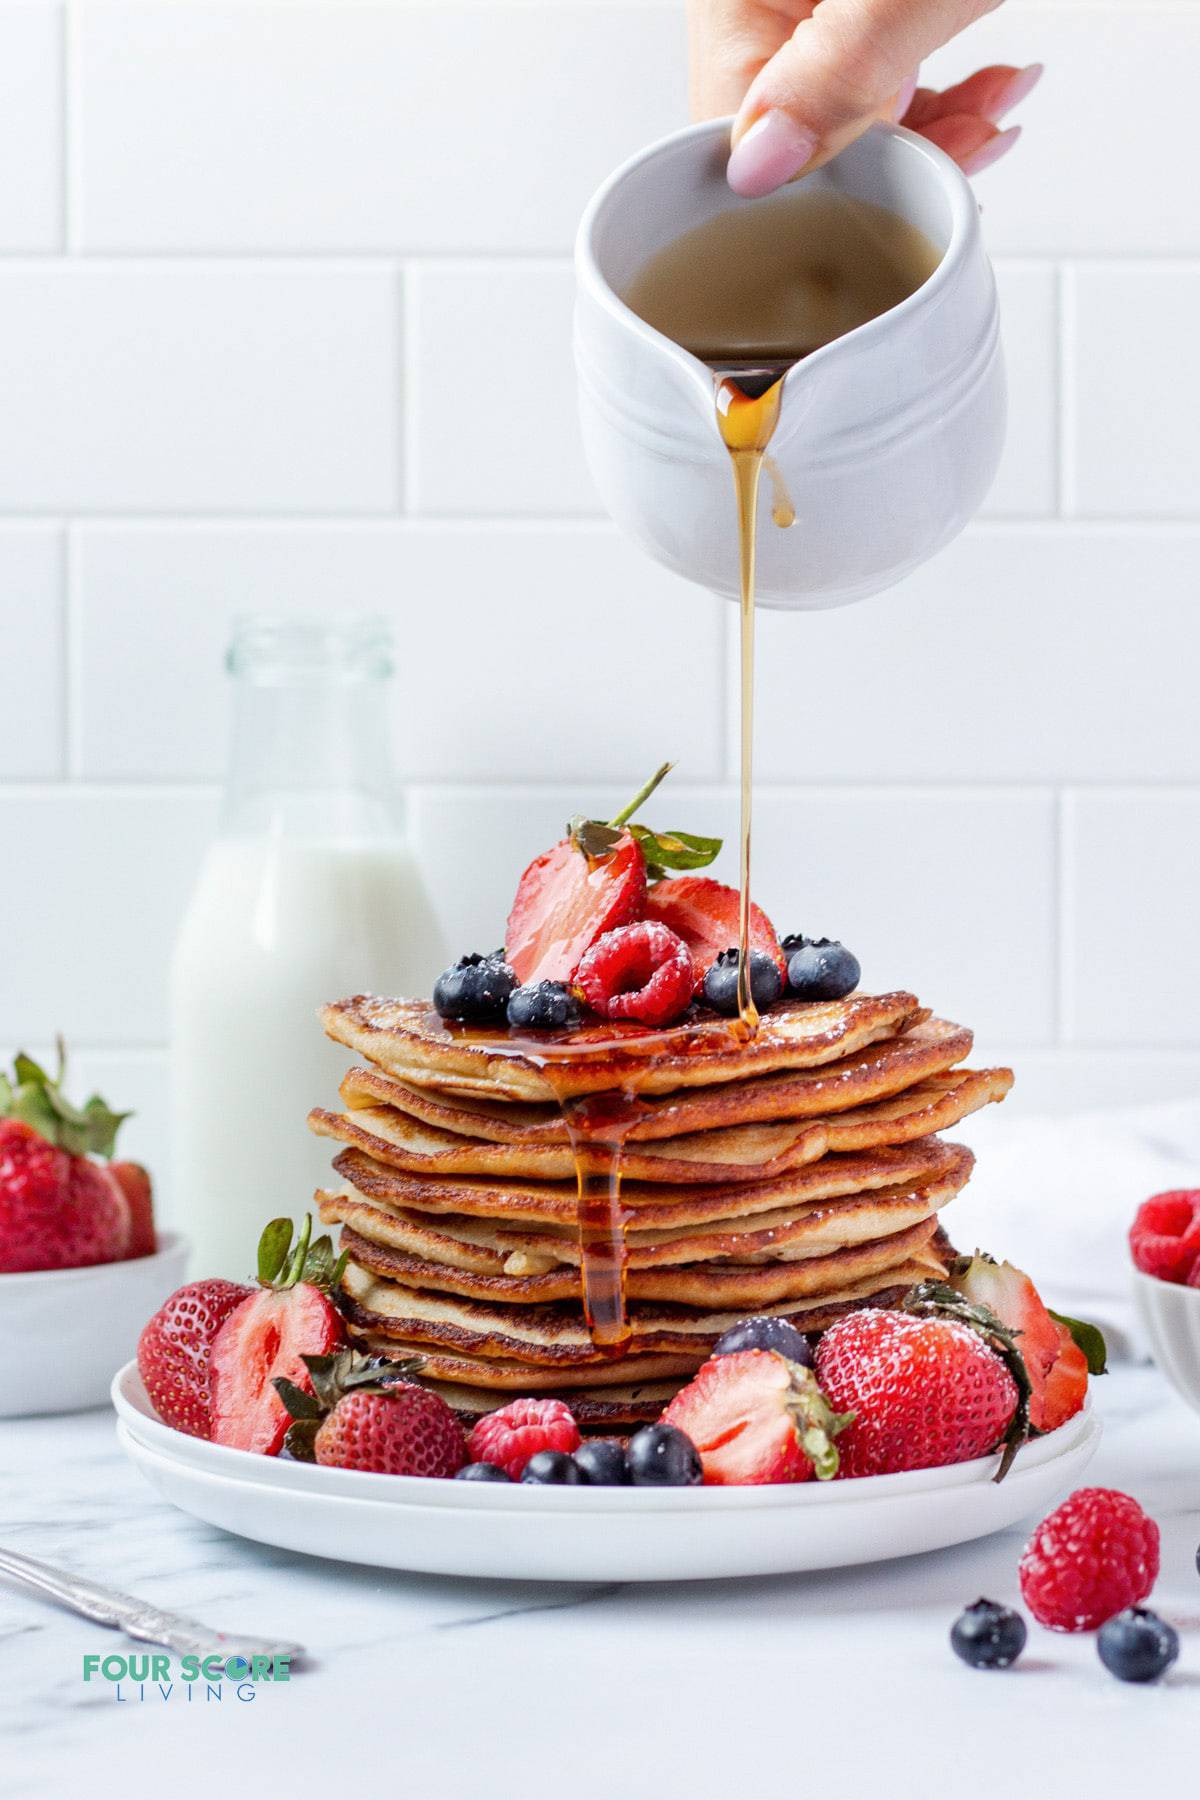 A tall stack of almond flour pancakes topped with fresh mixed berries and surrounded by fresh mixed berries. A hand is pouring syrup over the stack.